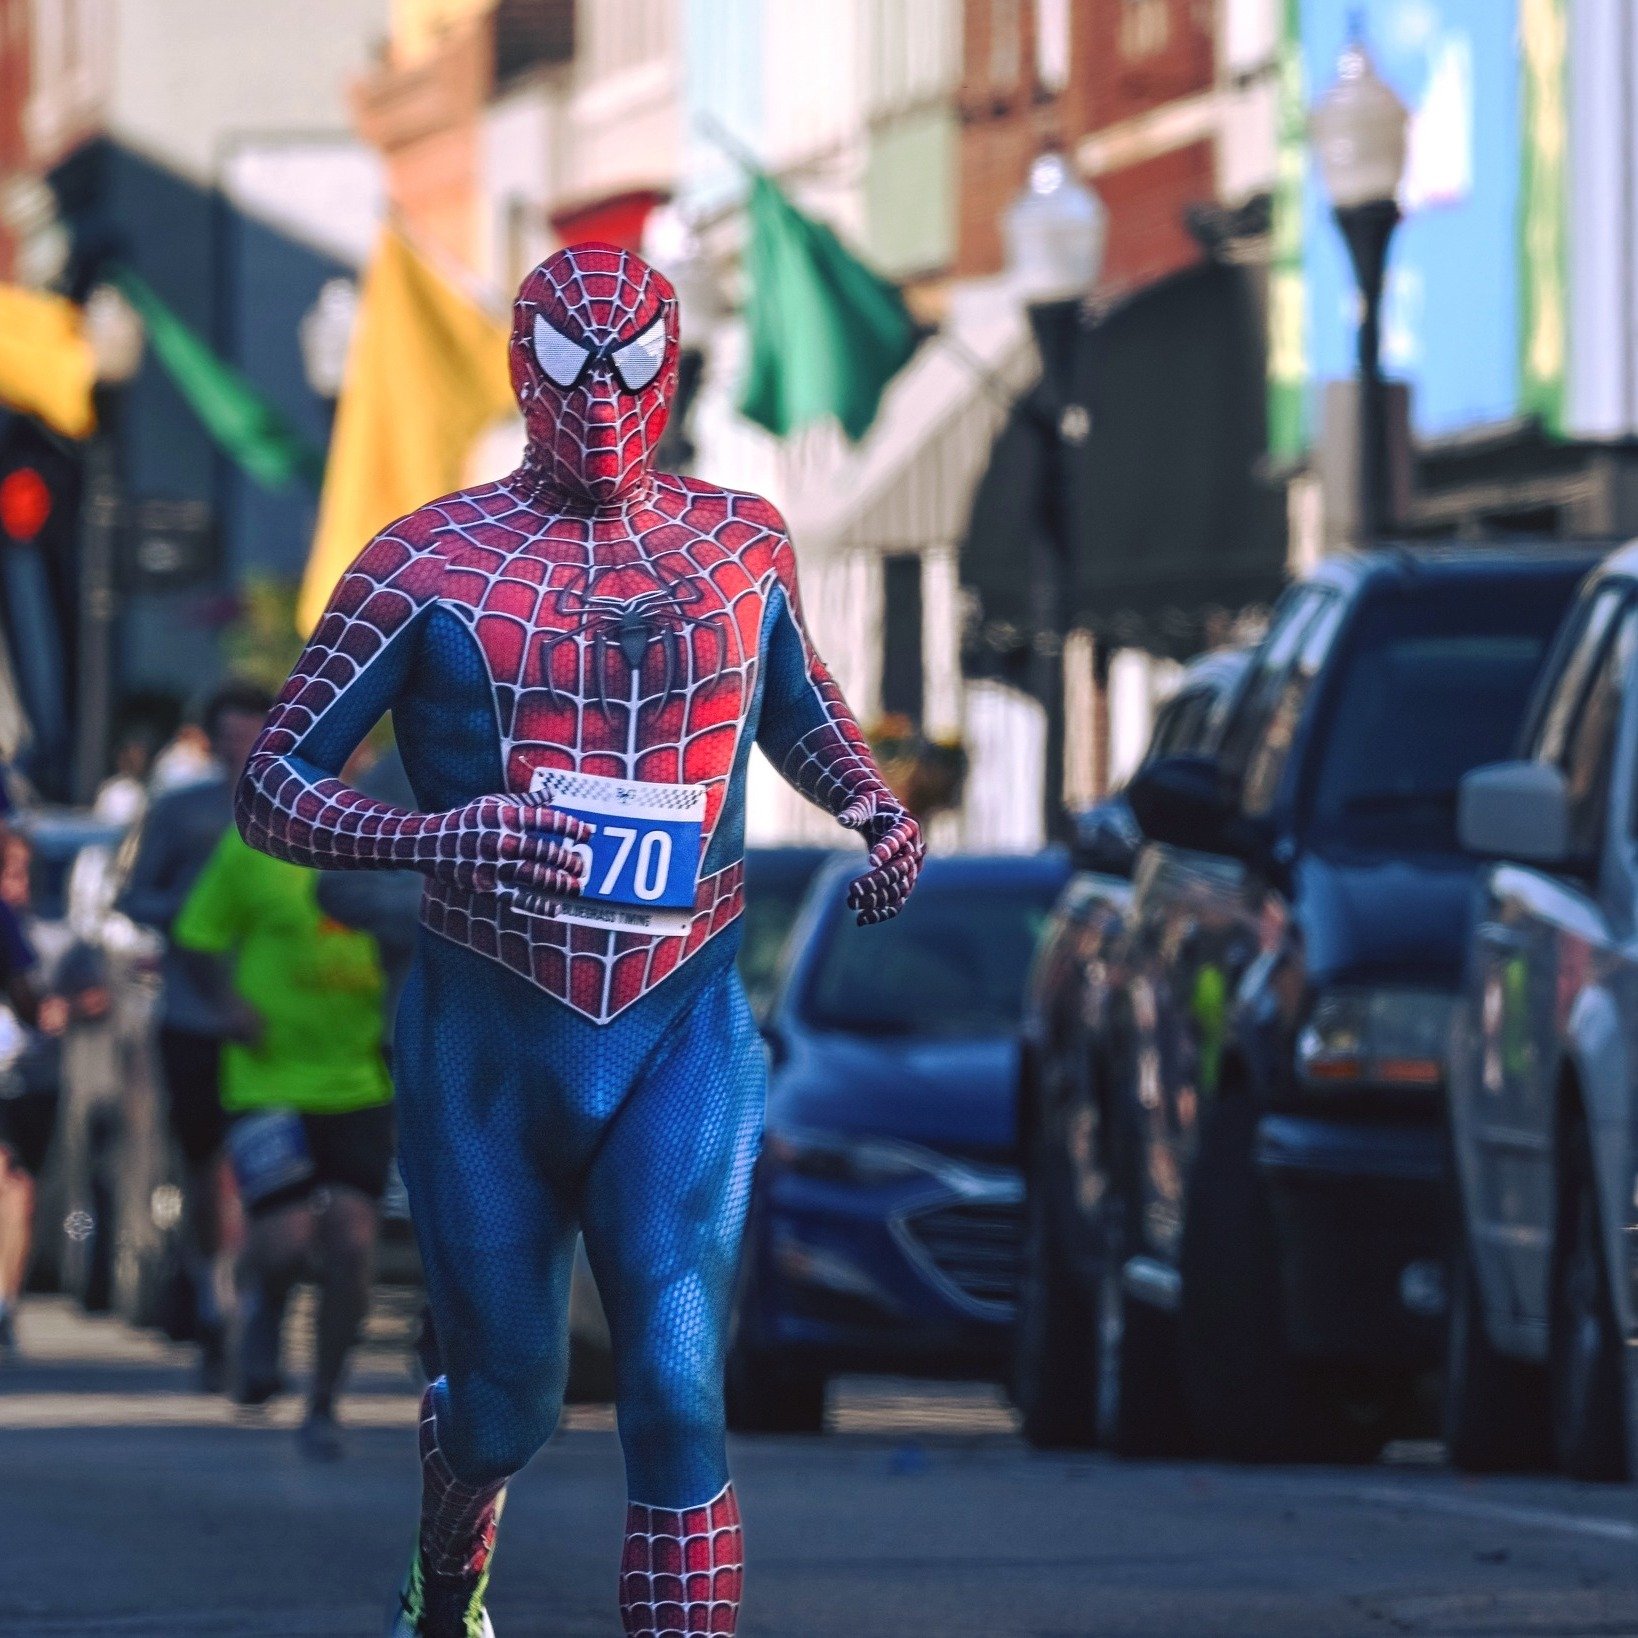 AND SPIDERMAN wins the Tour de Paris 5k presented by @anytimefitnessparisky! 

Congrats to our overall 1st place finisher, Dan Willard, 32, of Paris, Kentucky with a time of 22:23!

2nd Place Male Overall-- Luke Martin, 22, Lexington, Kentucky, 22:49